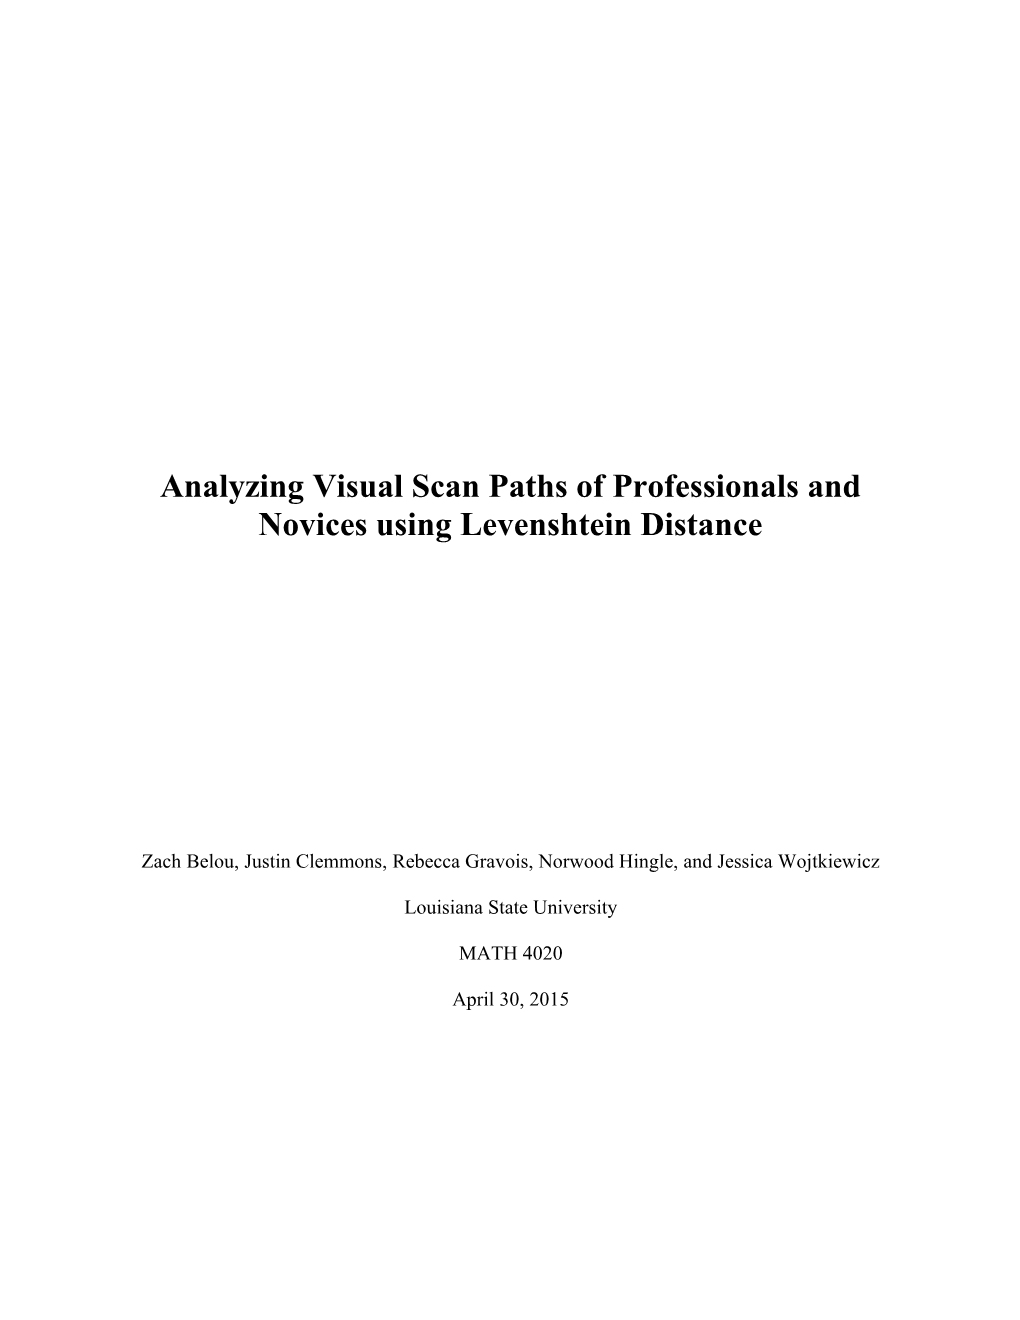 Analyzing Visual Scan Paths of Professionals and Novices Using Levenshtein Distance